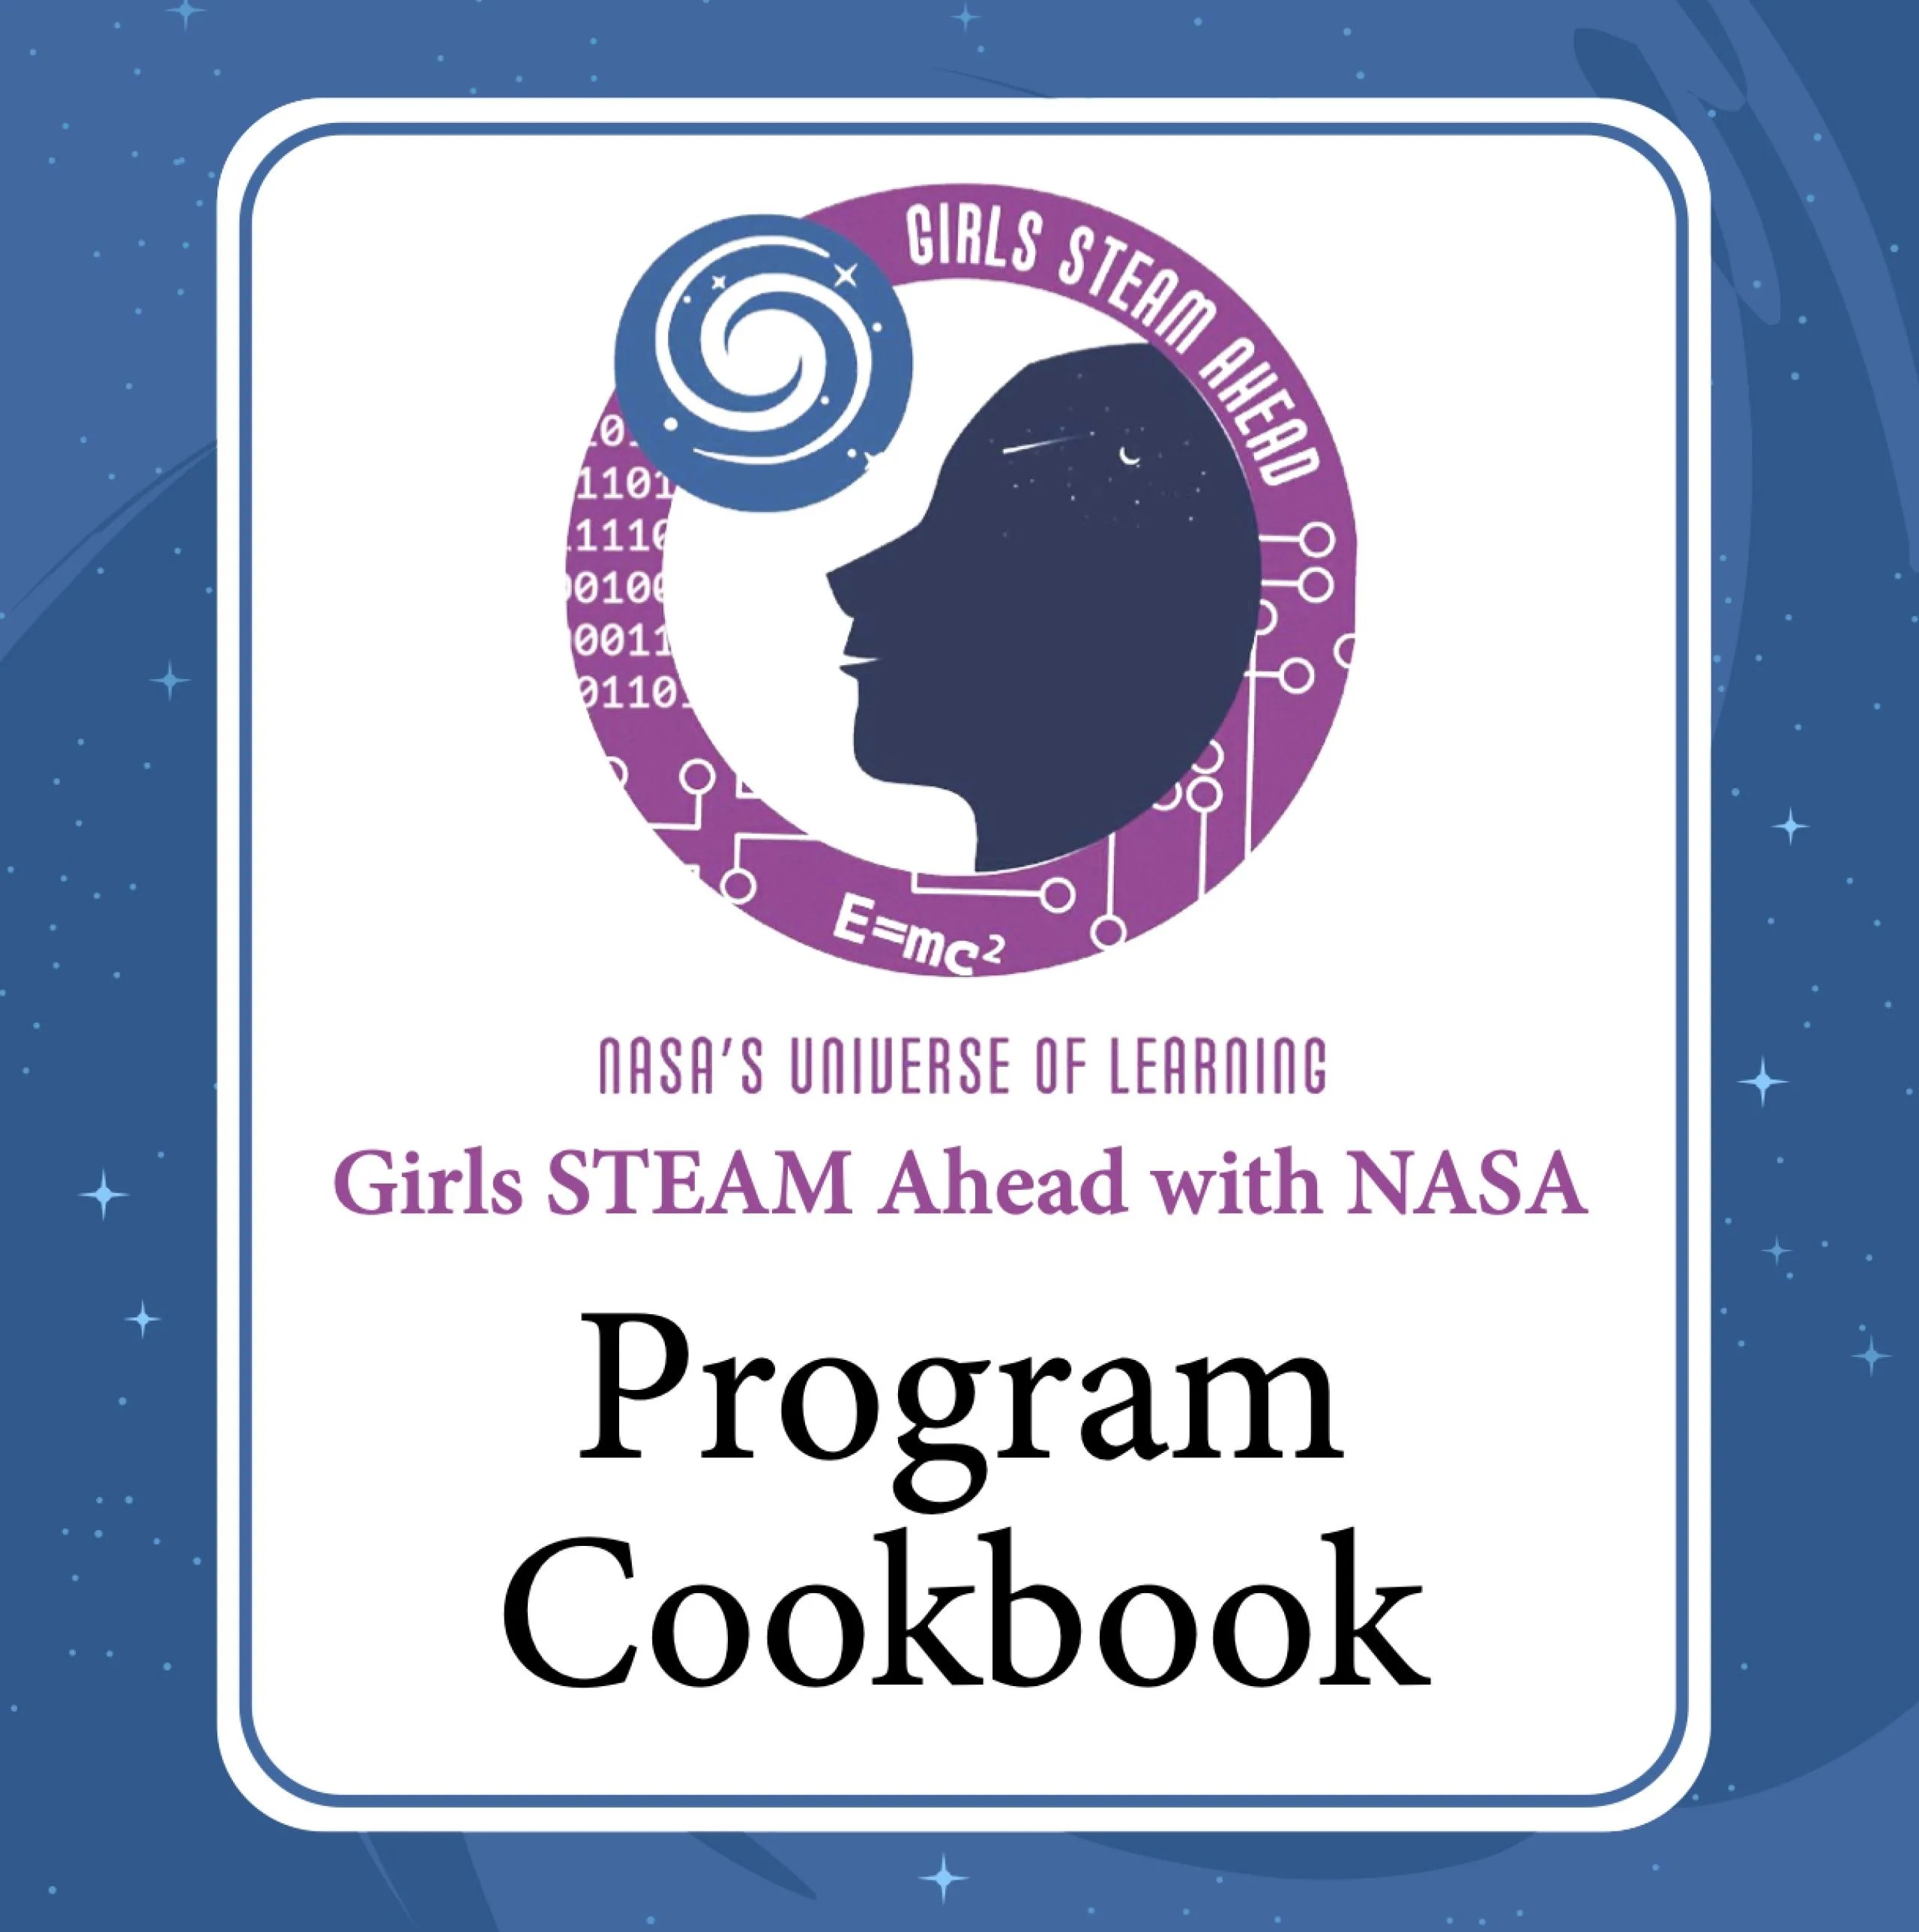 A white illustrated rectangle-shaped box with round corners lies against an illustrated blue background. In the white box are the words “NASA’S UNIVERSE OF LEARNING Girls STEAM Ahead with NASA” in purple. Below that are large words “Program Cookbook” in black. At the top of the white box, above the words, is a logo featuring the dark silhouette of a girl’s face looking up at a blue illustration of a galaxy. They are inside a purple-bordered circle with the text “Girls STEAM Ahead” in white.